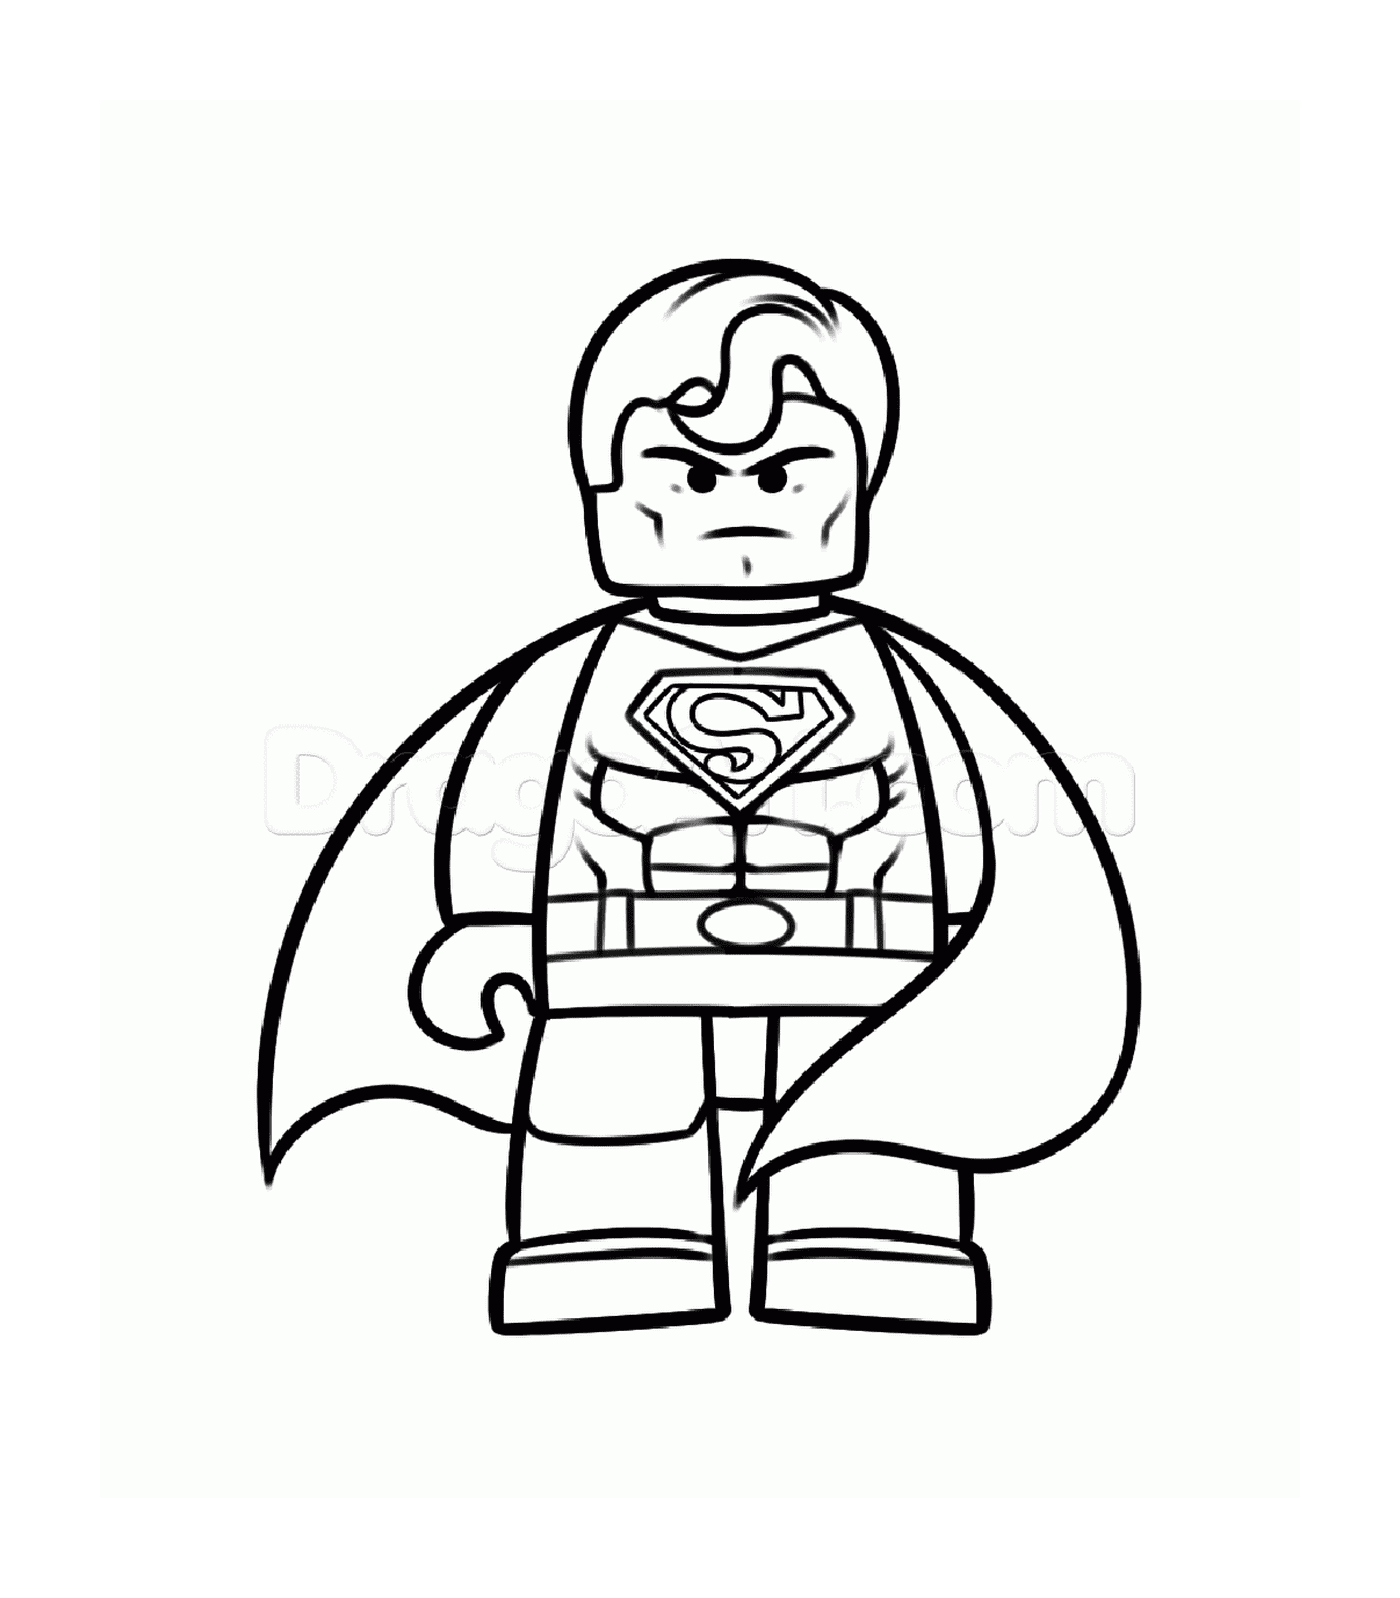  Superman angry with Batman Lego 